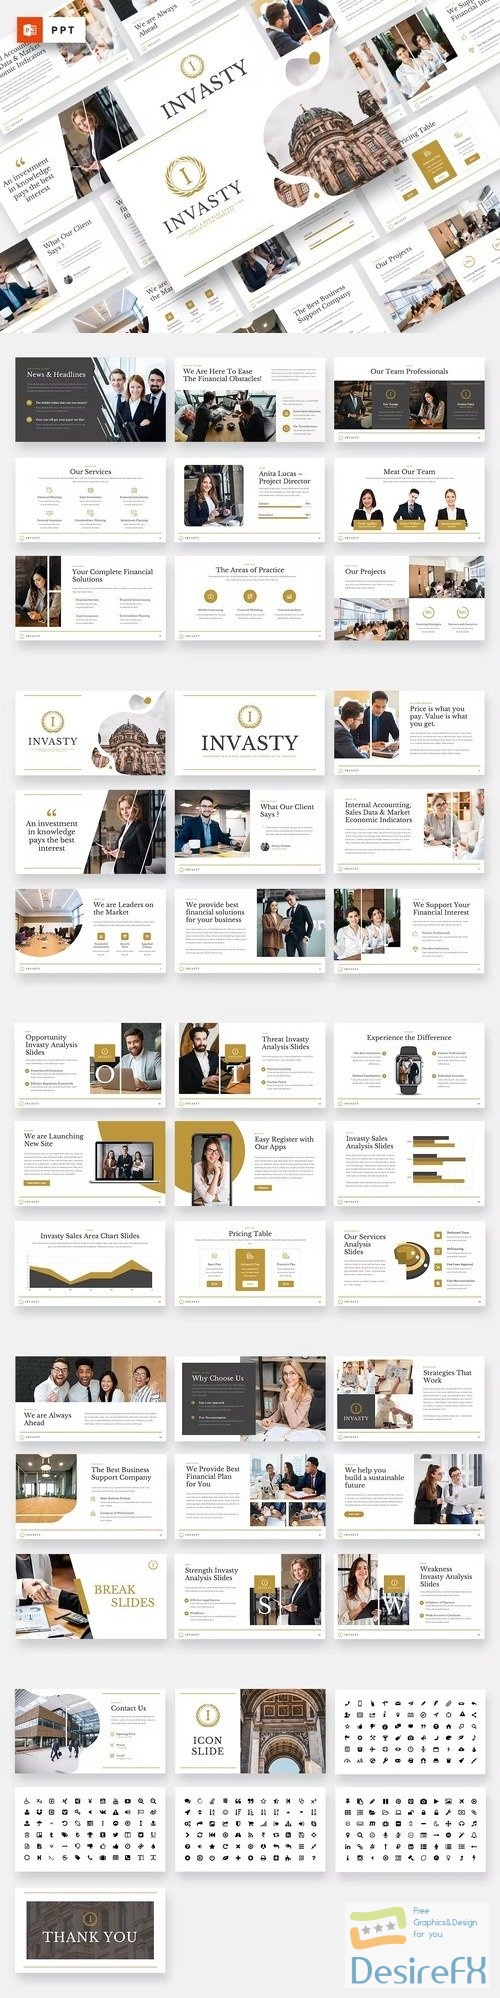 INVASTY - Investment Powerpoint Template